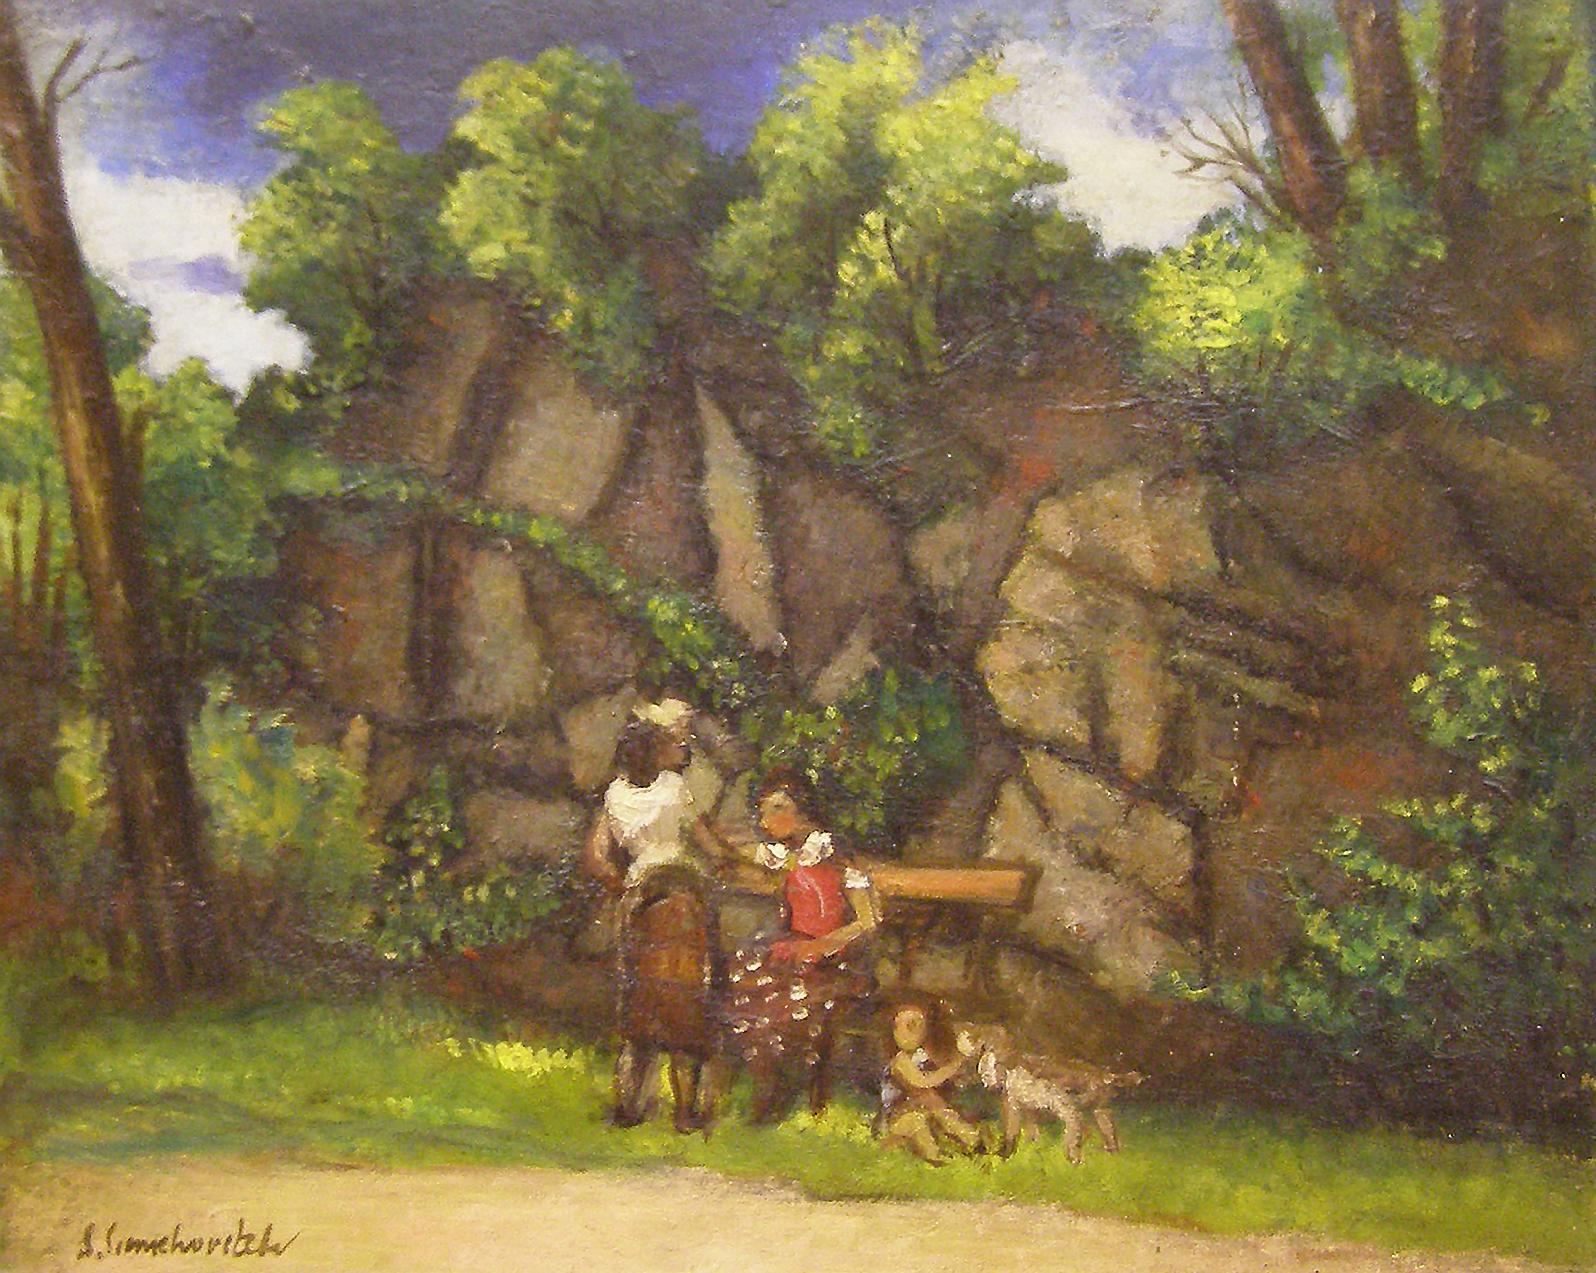 Women in the Park, Greenwich, Connecticut landscape - Painting by Simka Simkhovitch